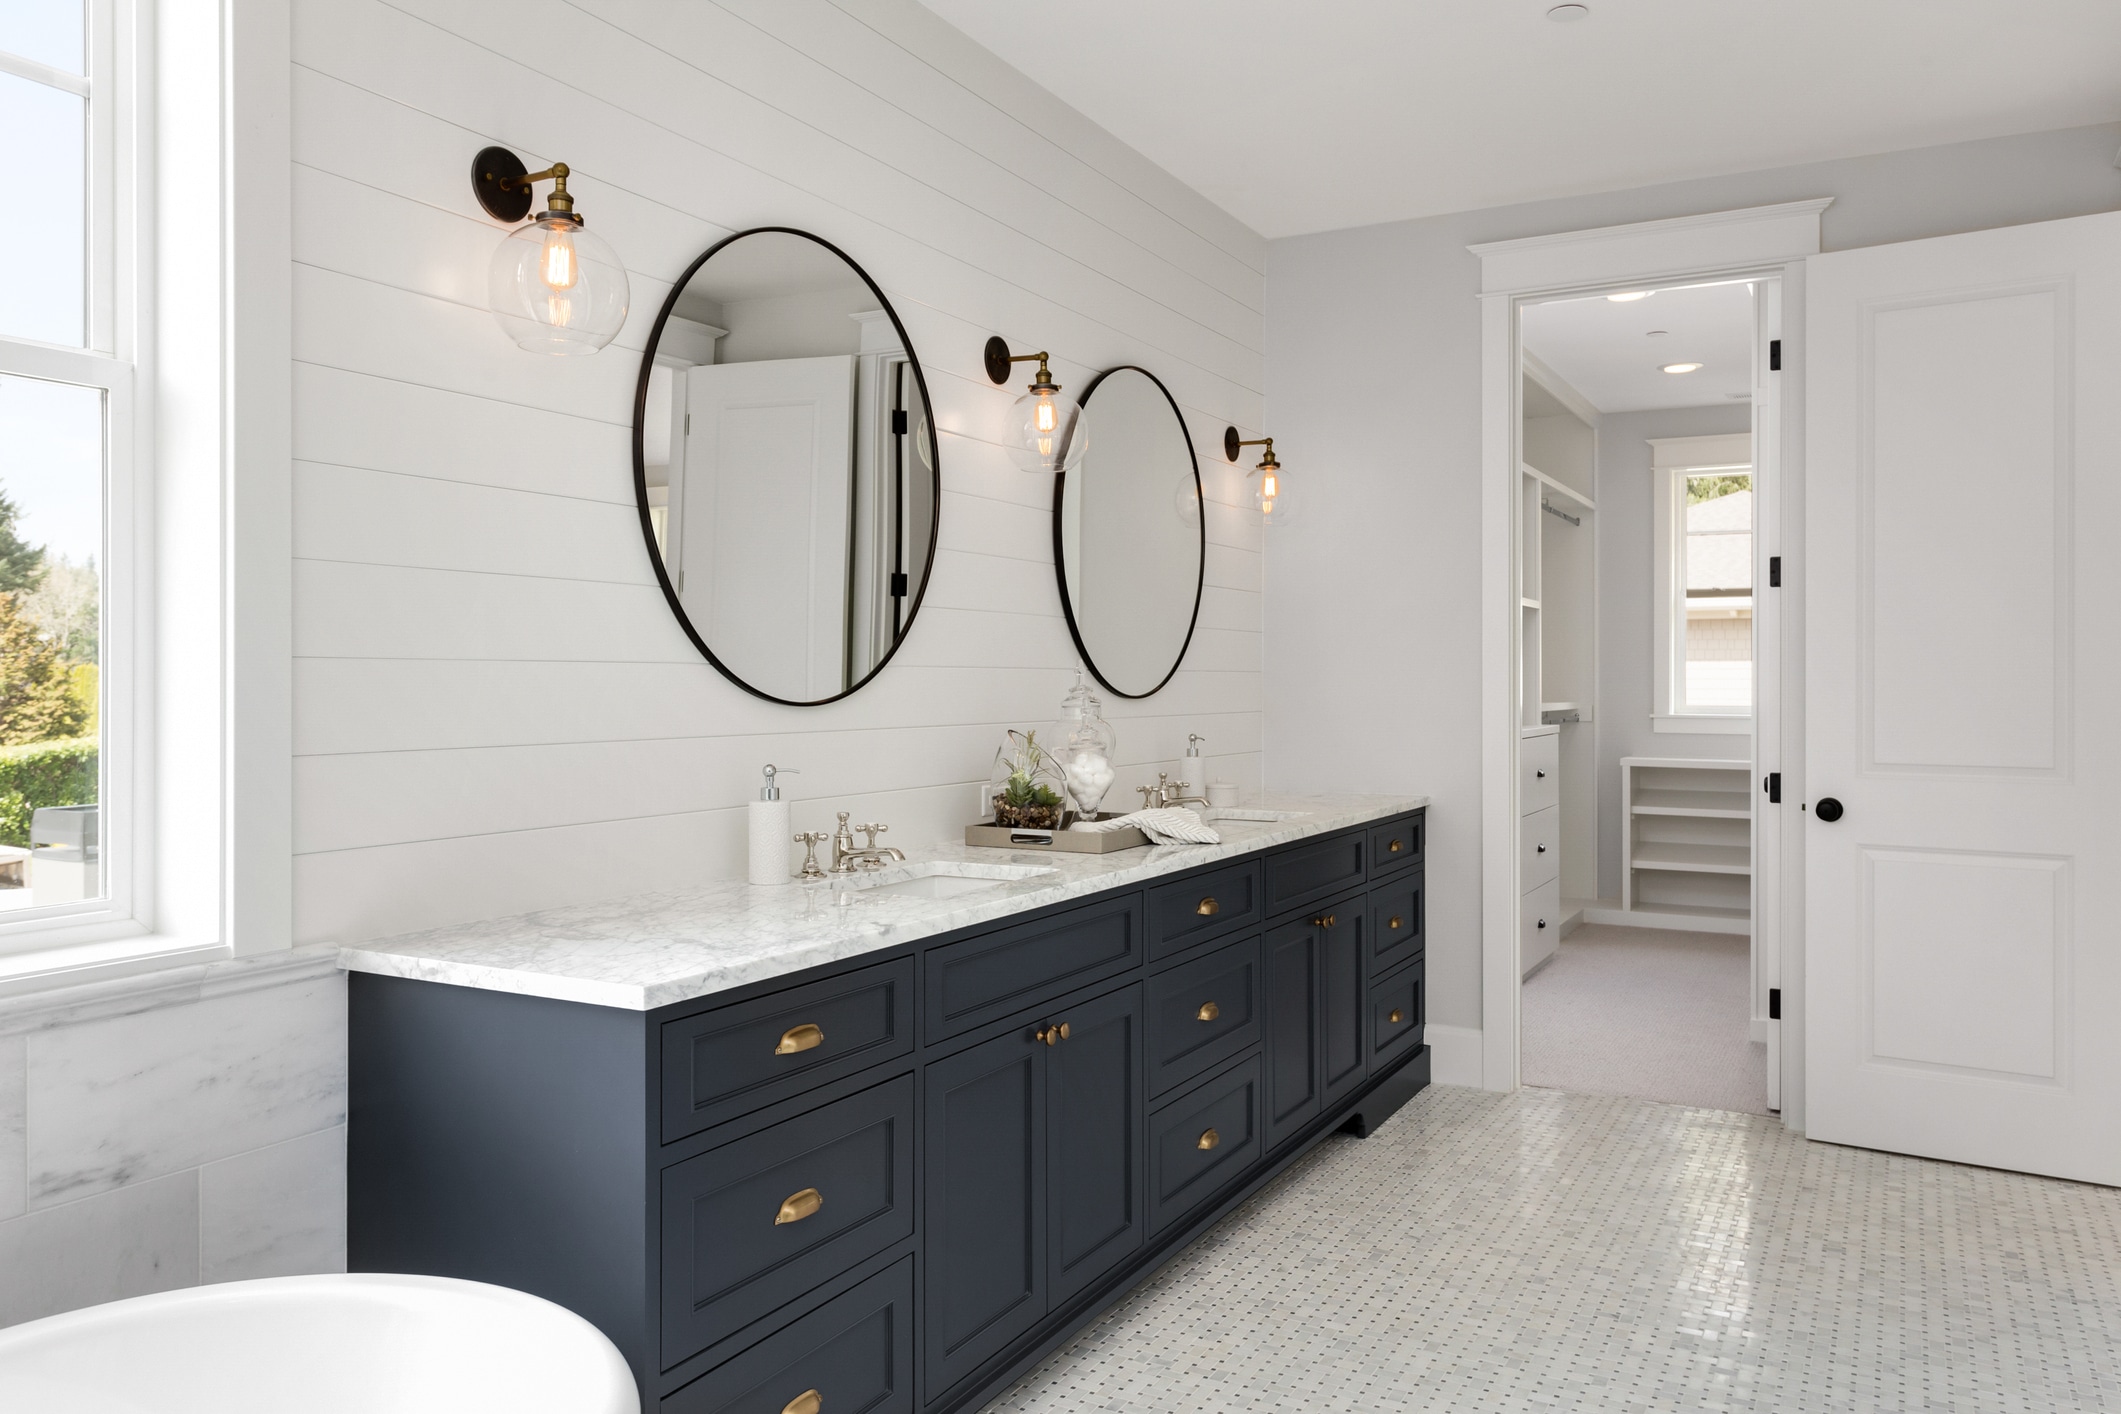 Bathroom in New Luxury Home with Two Sinks and Dark Blue Cabinets. Shows Walk-In Closet